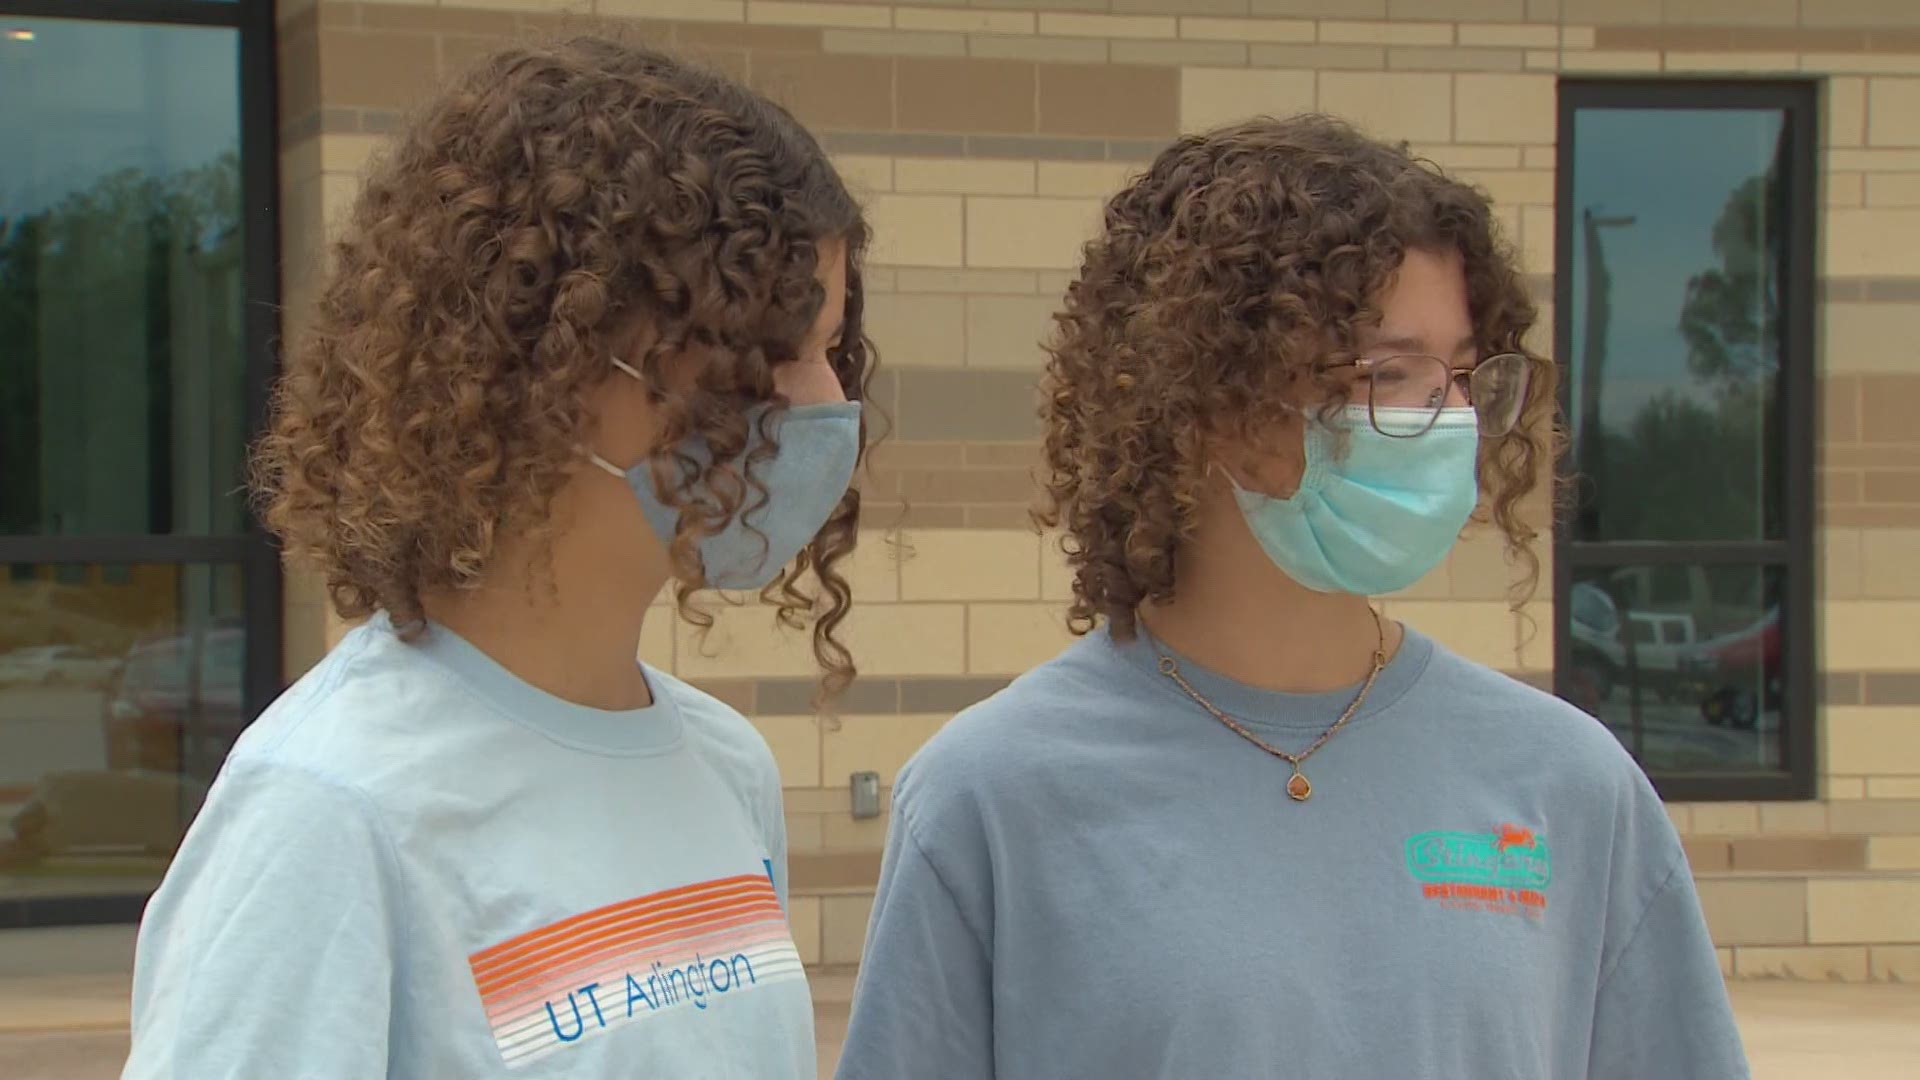 Arlington ISD vaccinated students at a clinic Monday, the same day Dallas ISD bussed high schoolers to vaccine sites for their first COVID shot.